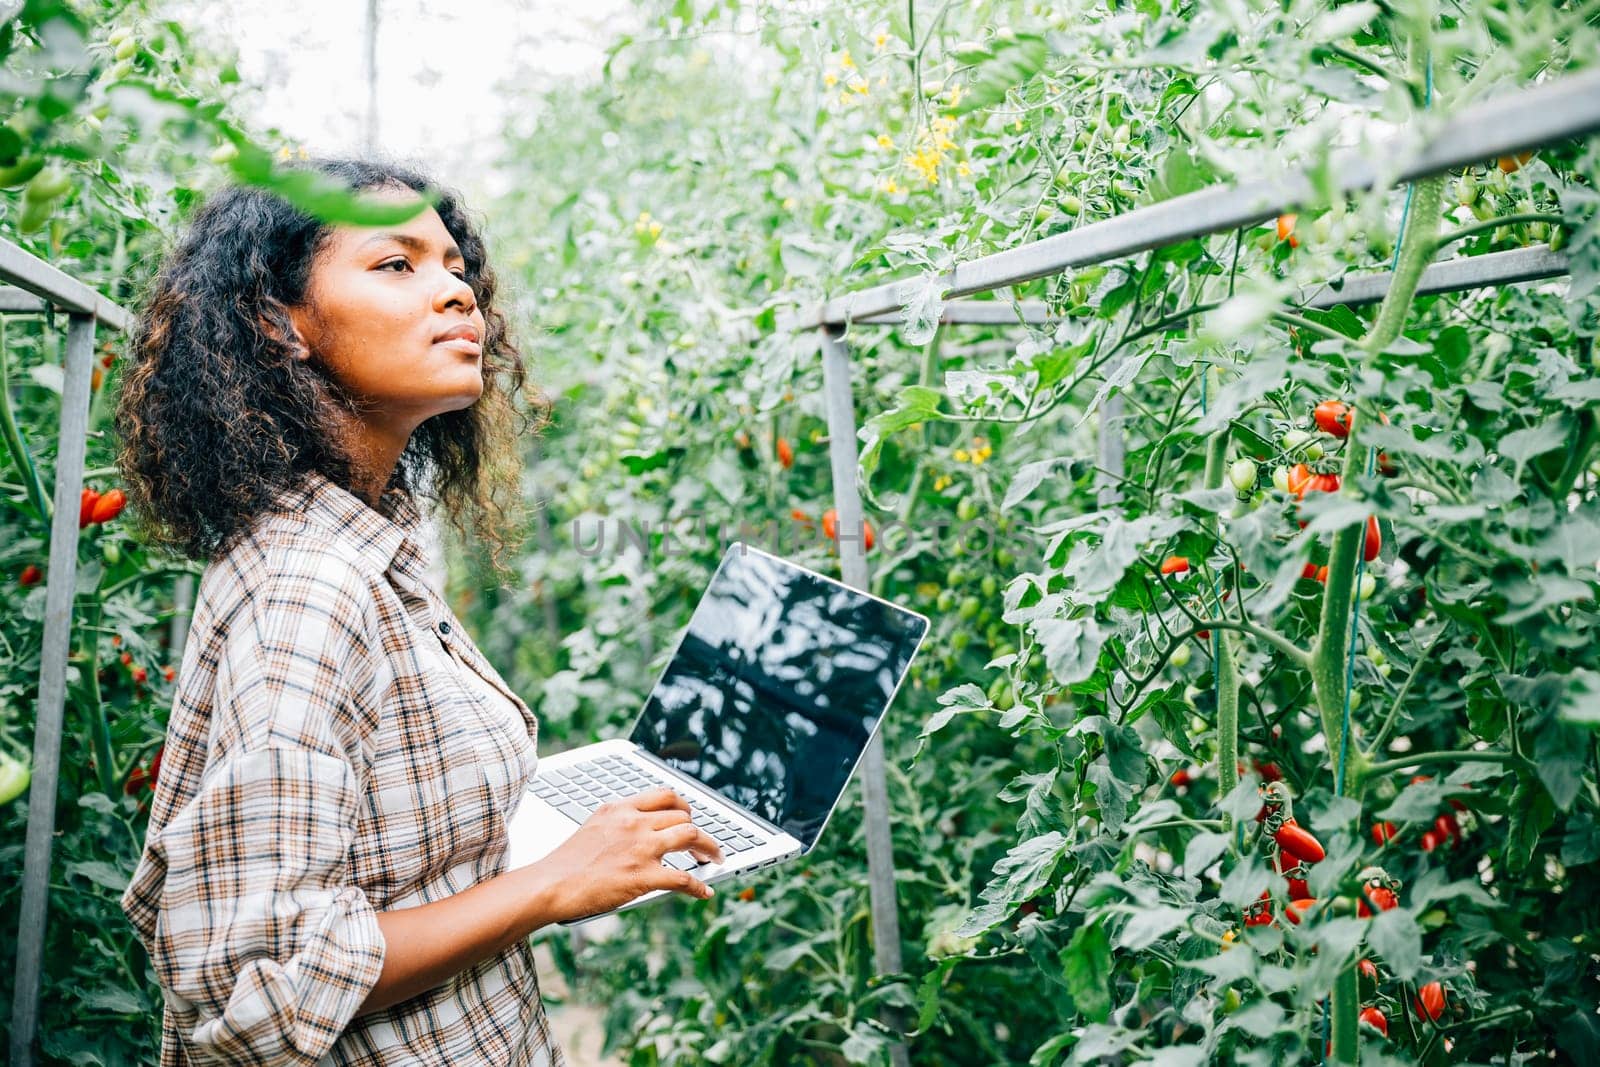 Farmers examine organic tomato quality in a greenhouse; woman notes on laptop. Her smiling portrait shows expertise innovative farming and dedication to growth care.